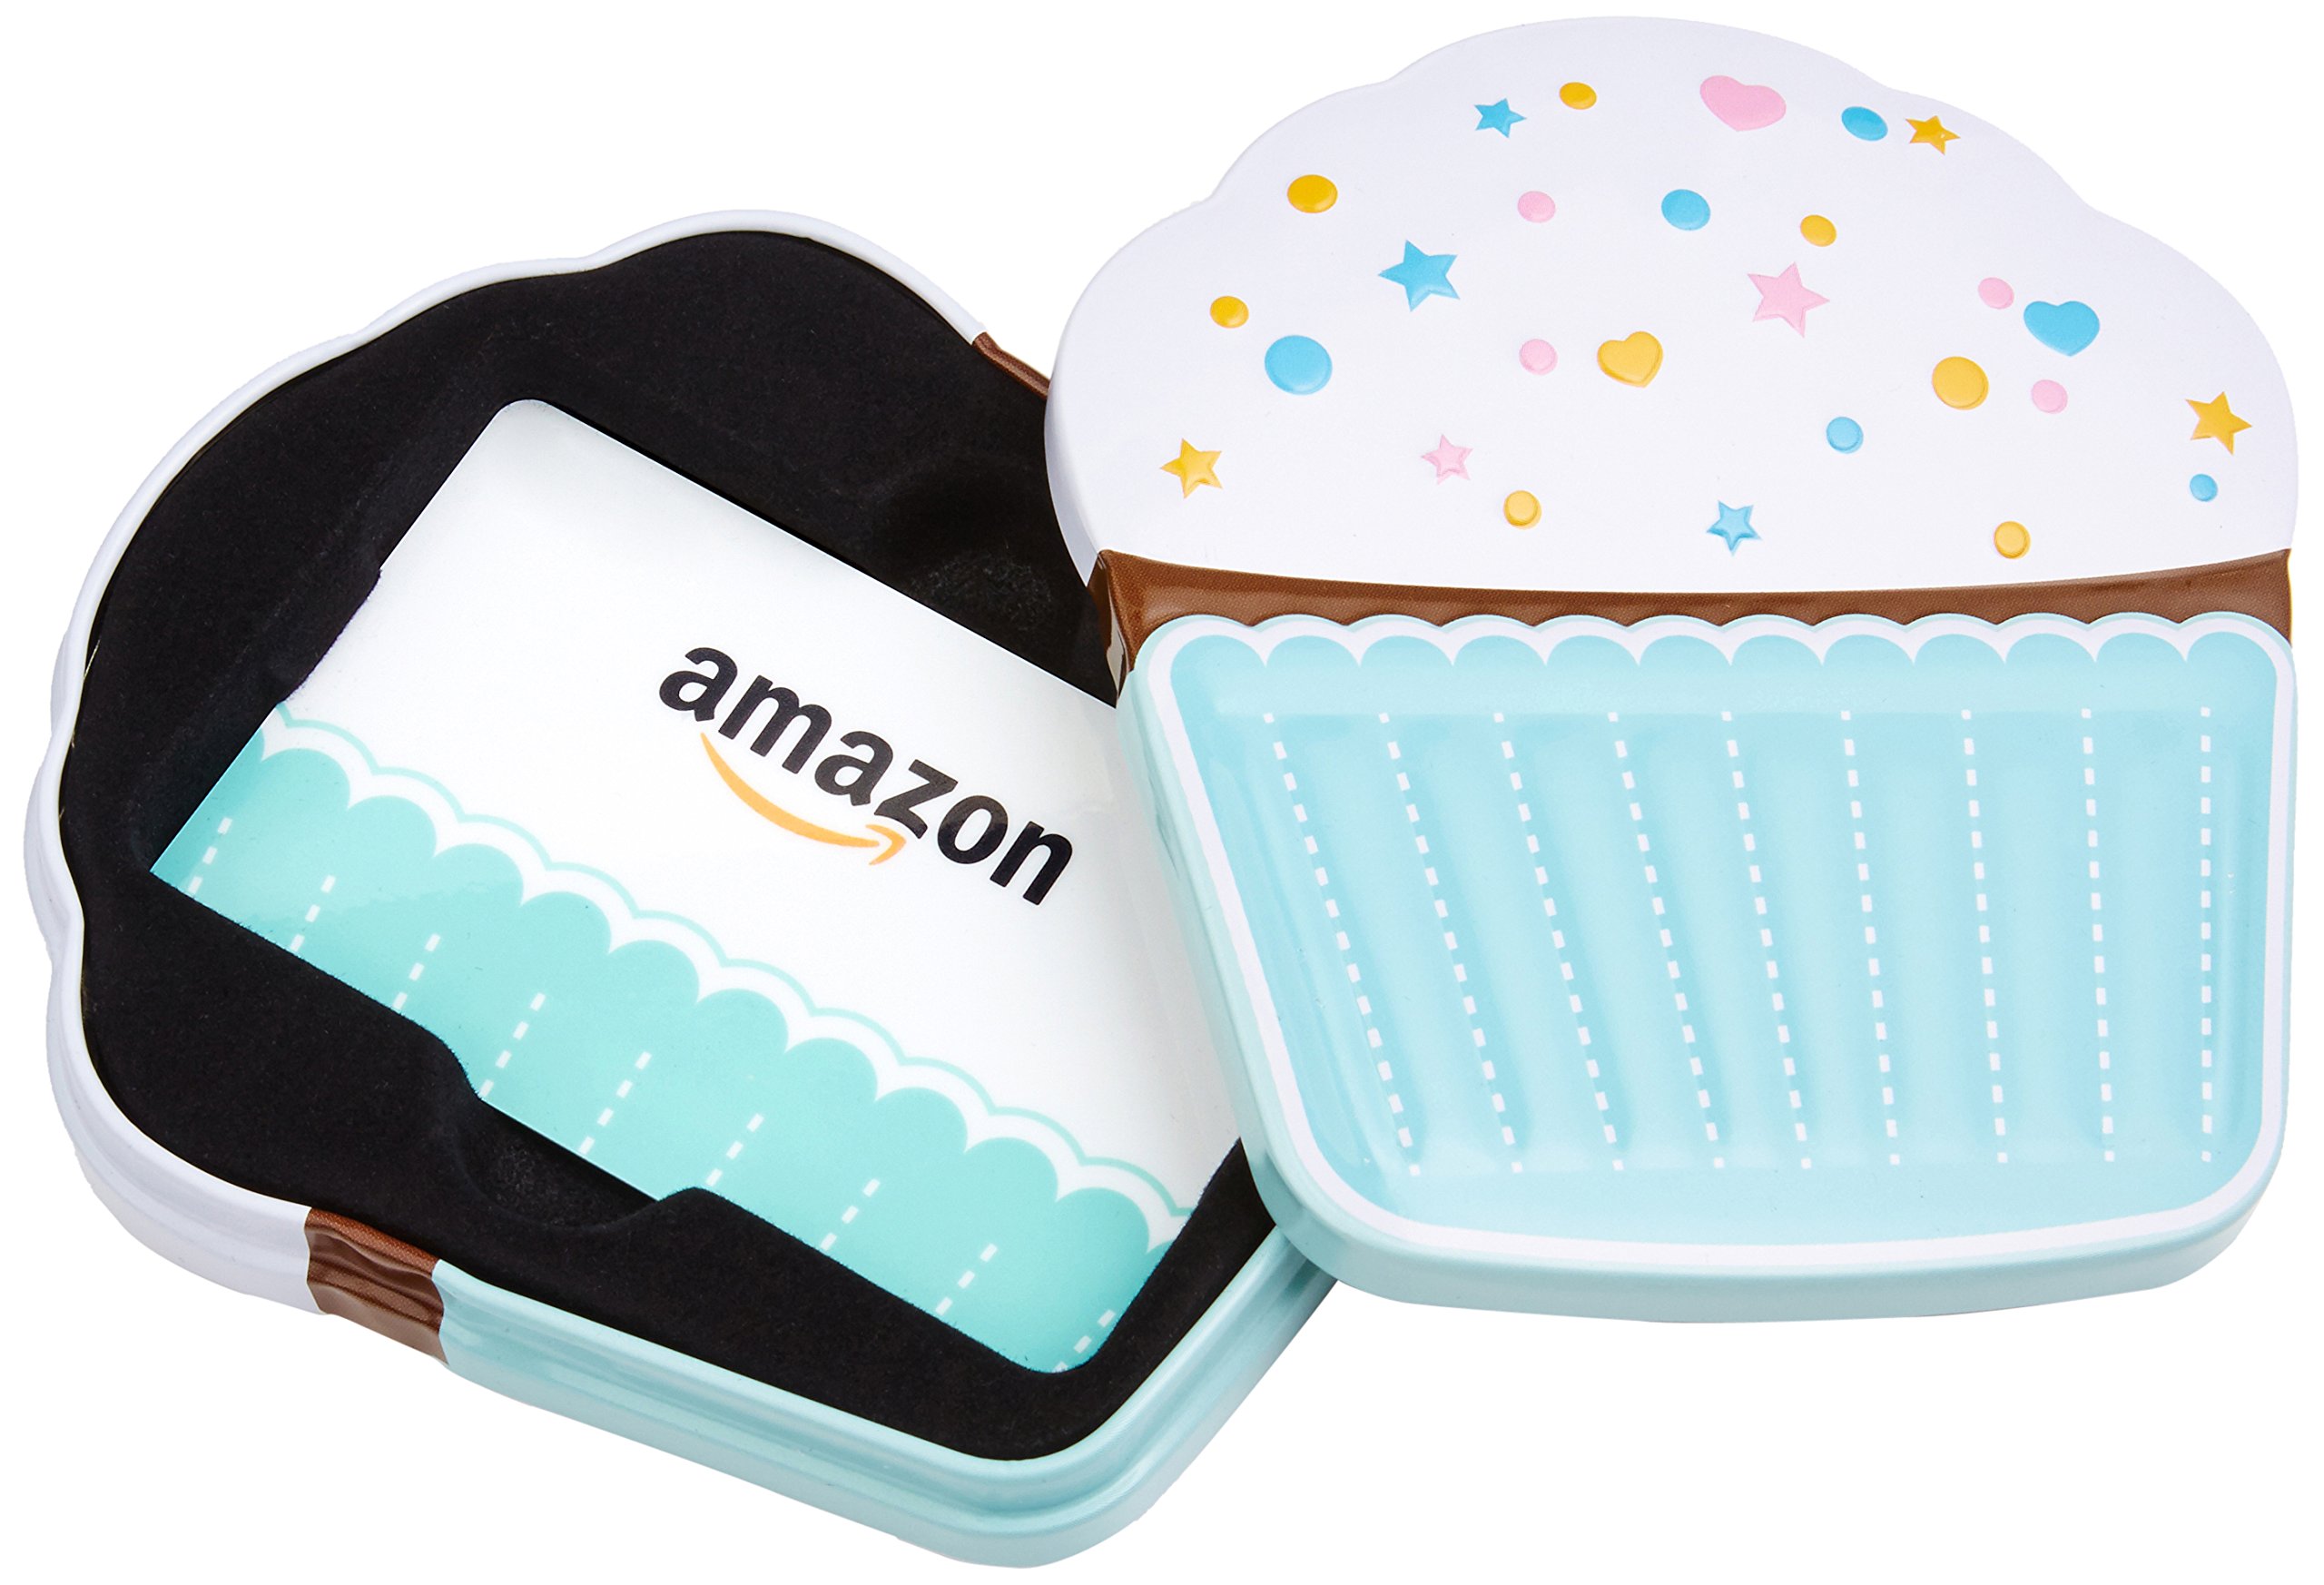 Book Cover Amazon.com Gift Card in a Birthday Gift Box (Various Designs) 0 Birthday Cupcake Tin